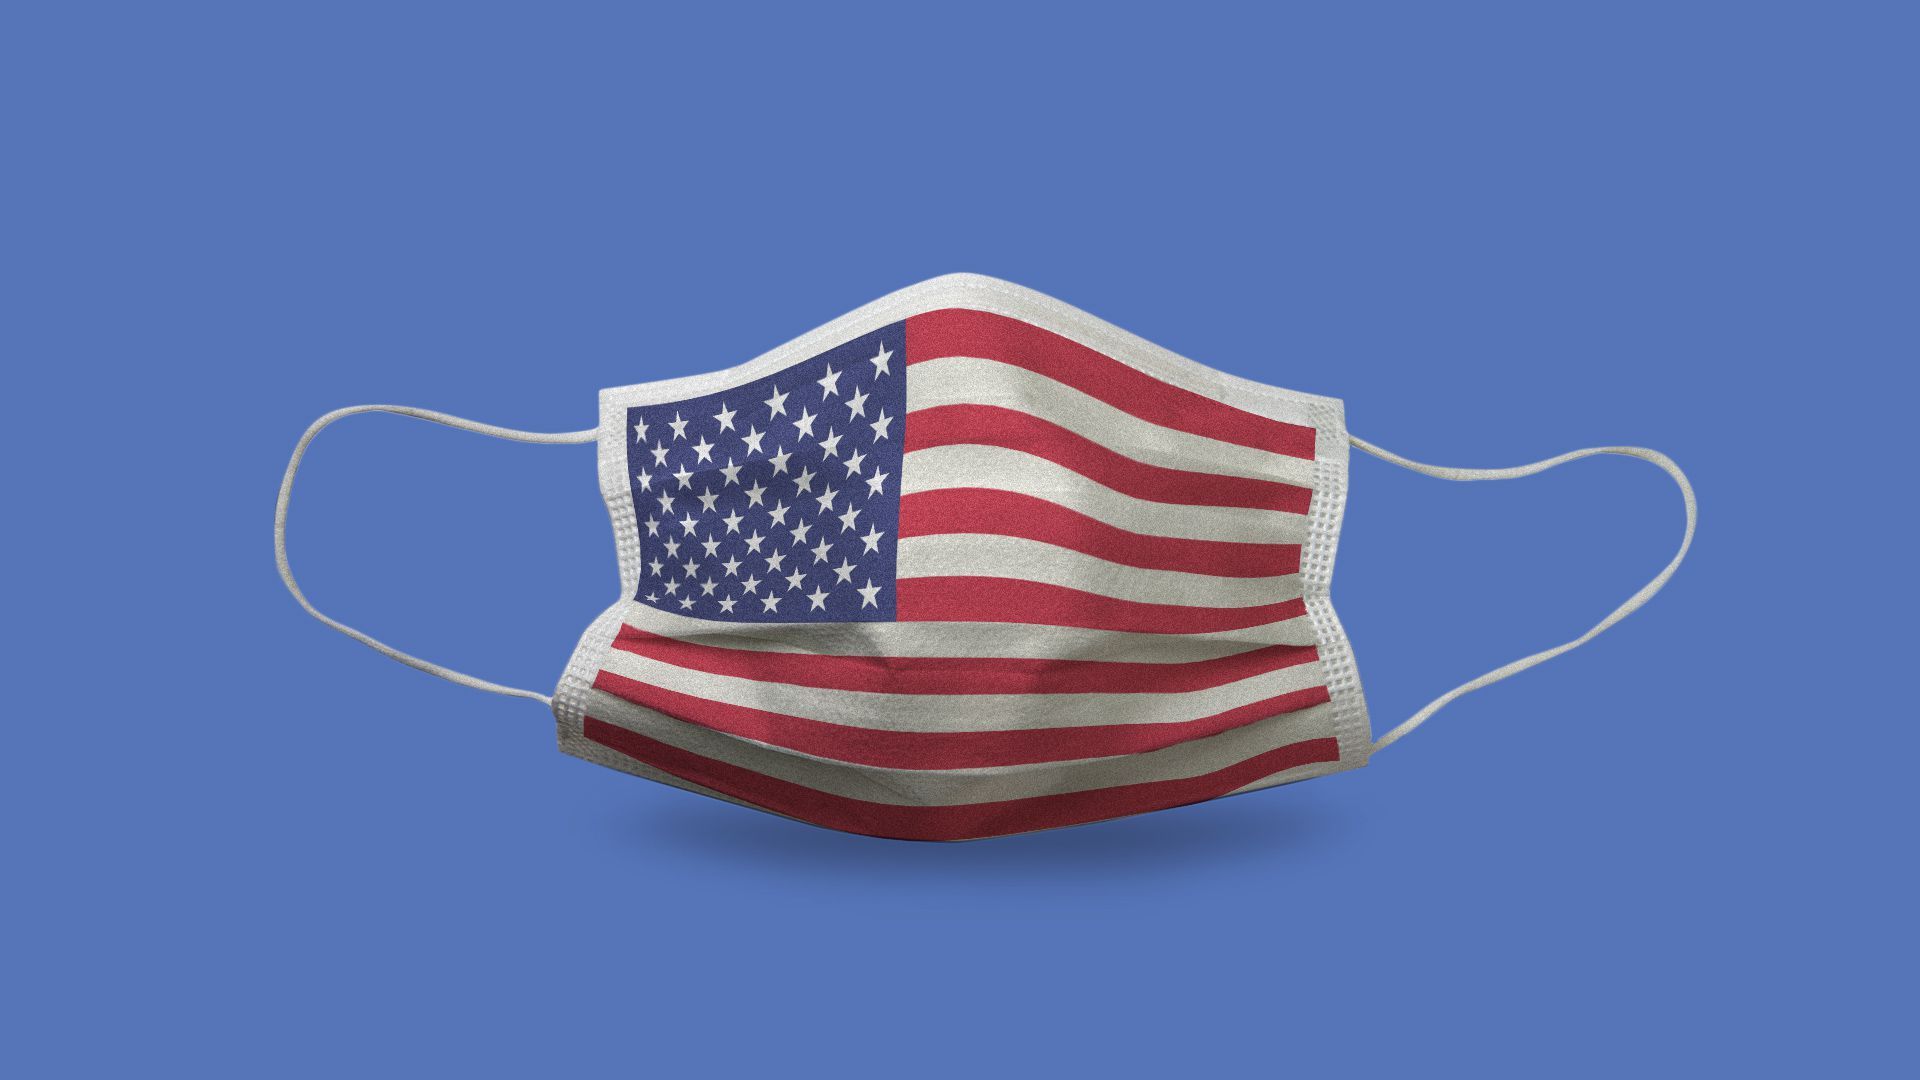 Illustration of a medical face mask with an American flag on it